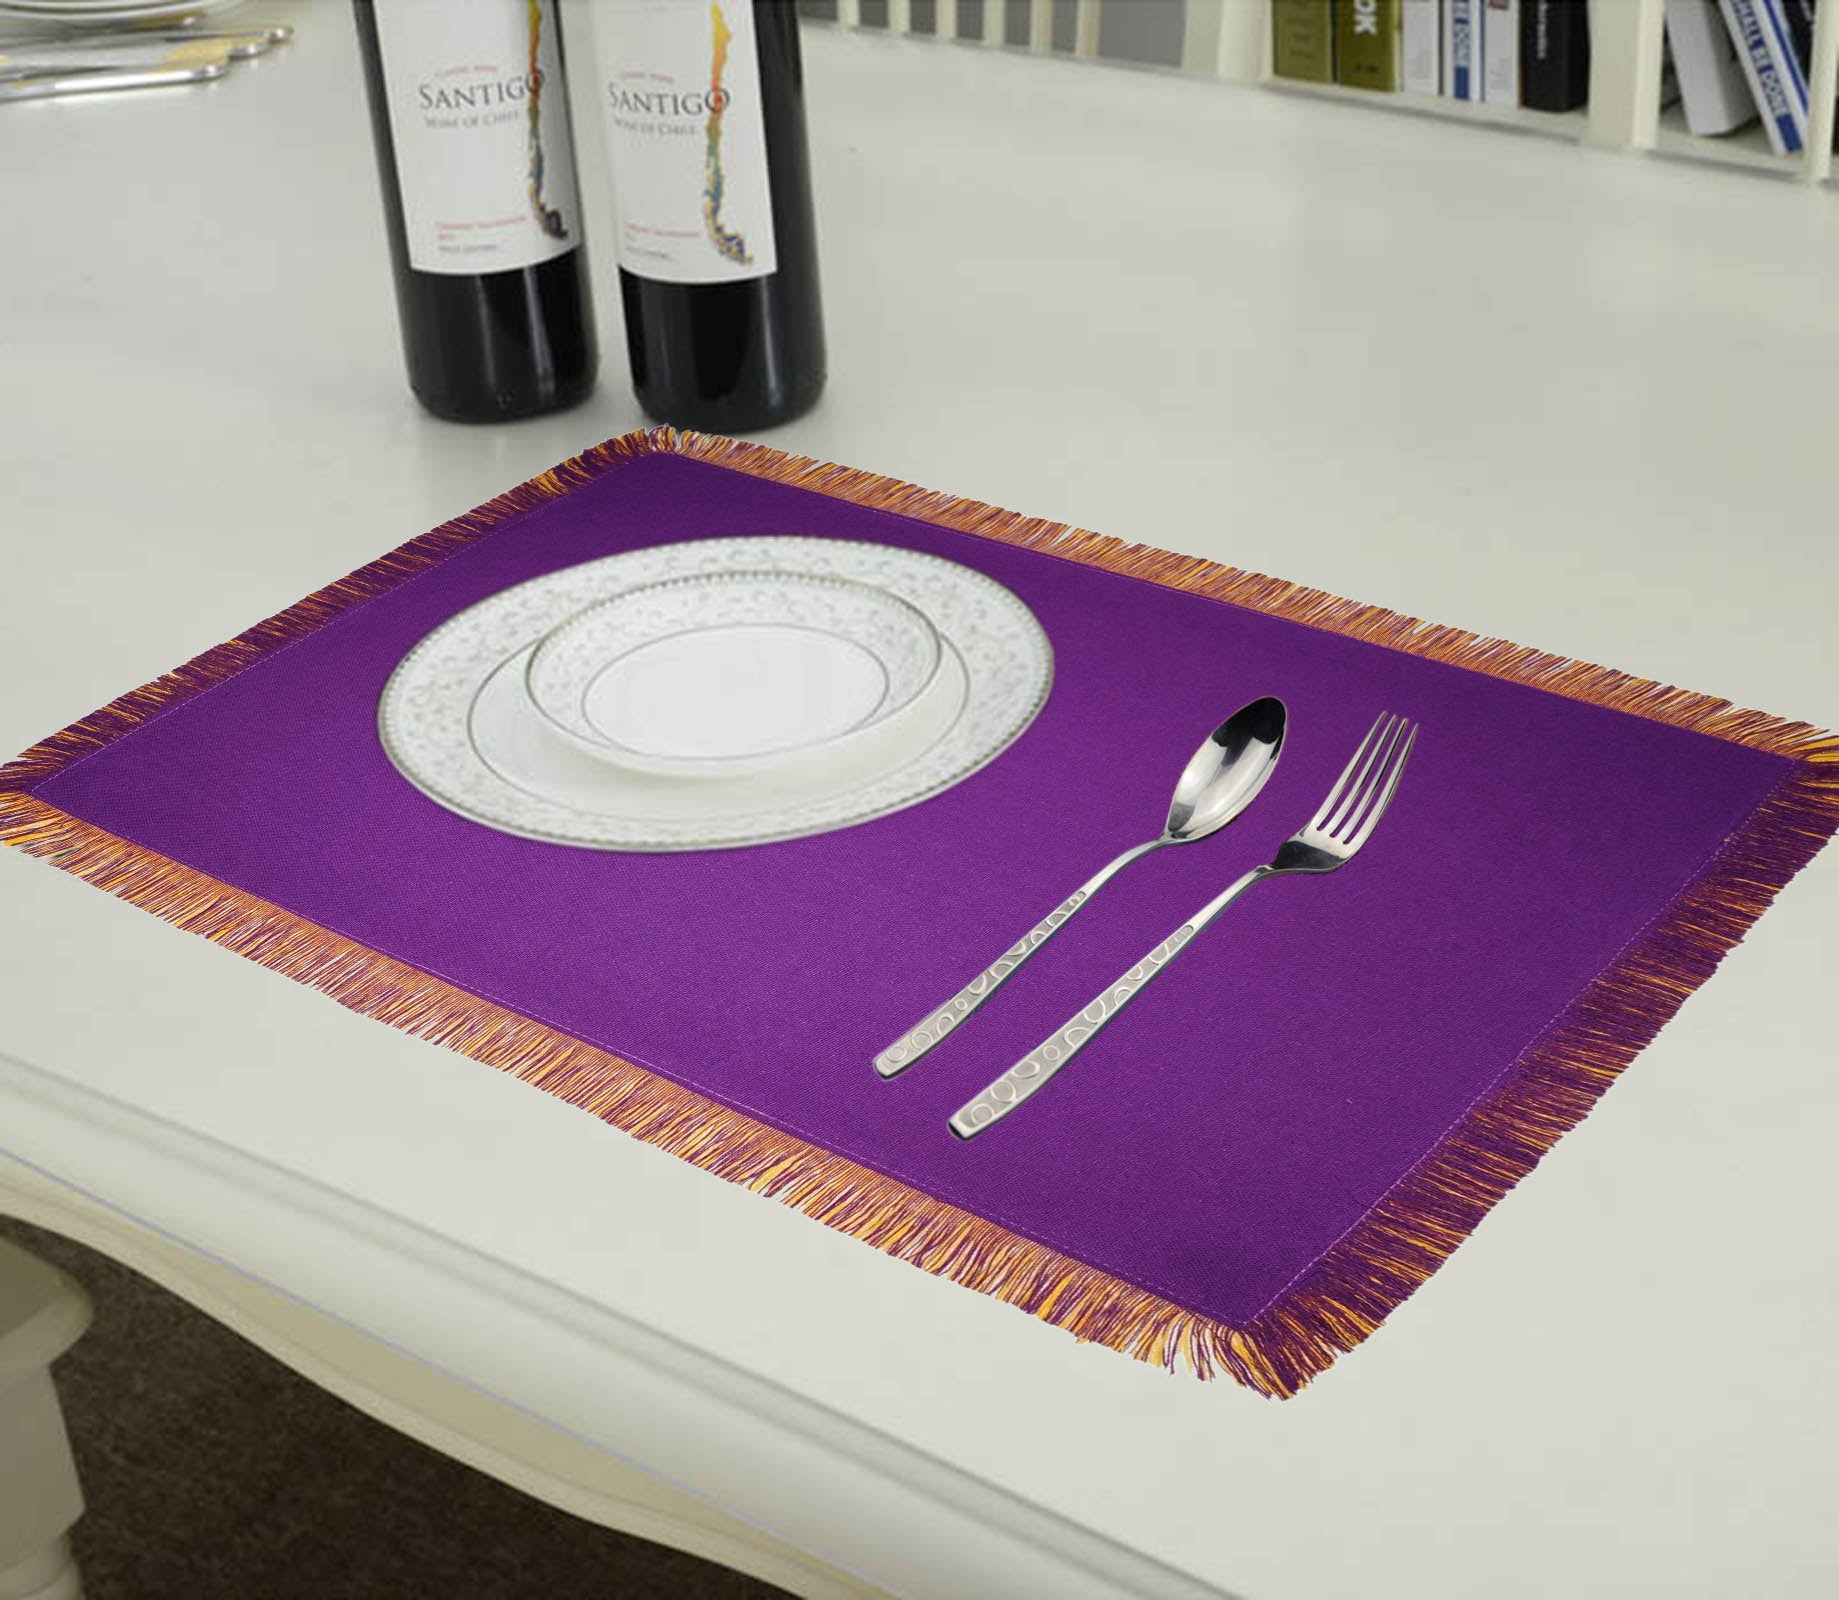 Lushomes dining table mats 6 pieces, Reversible Fancy Fringe dining table mat, dining table accessories for home, kitchen accessories items, Purple and Yellow  (13 x 19 Inches, Pack of 6)